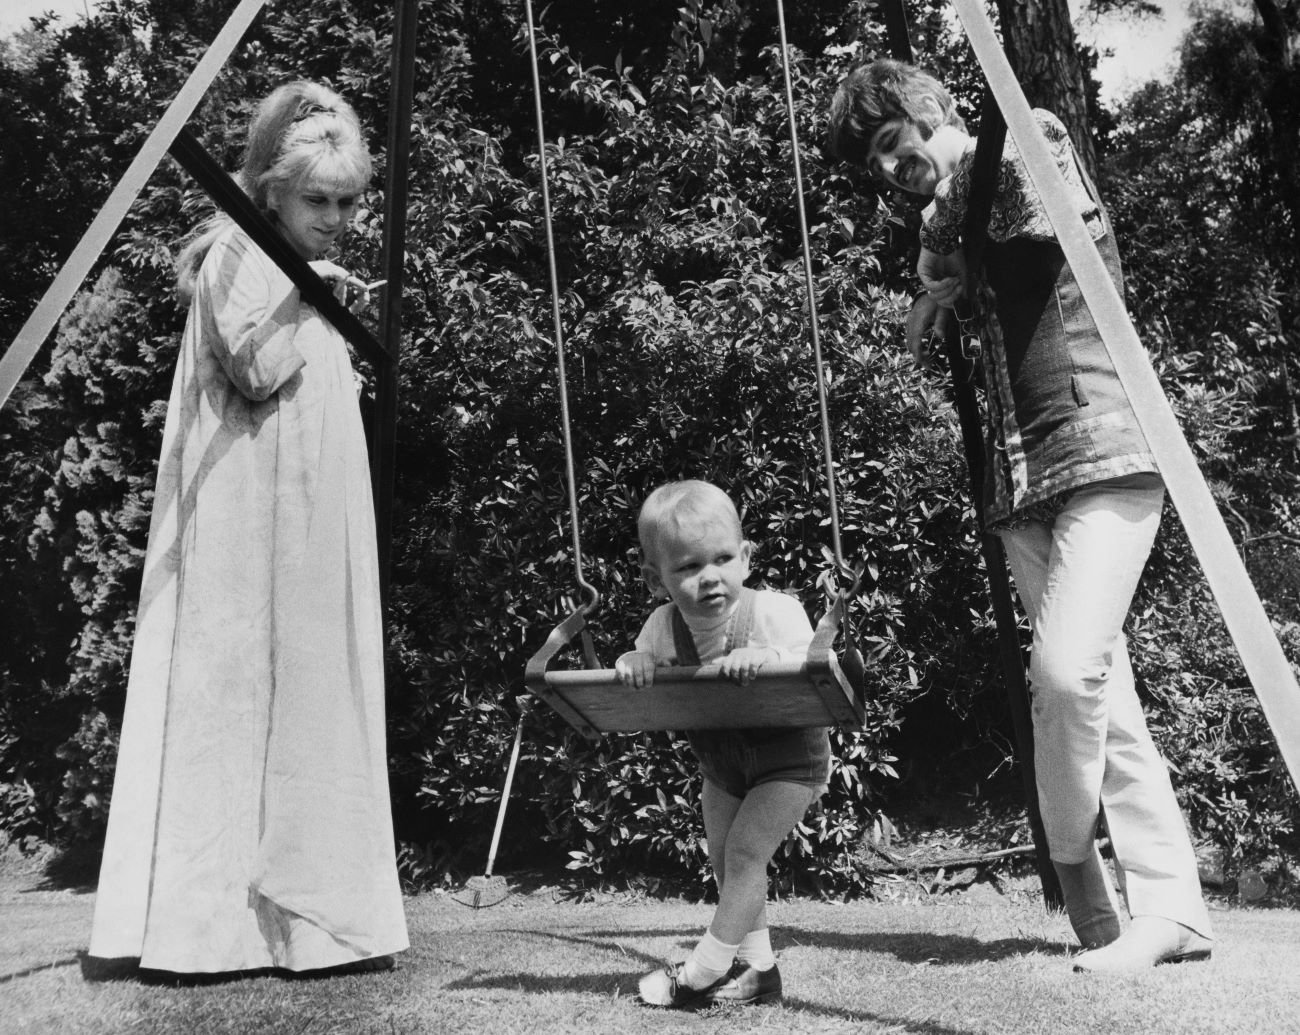 A black and white picture of Maureen Starkey and Ringo Starr looking at their son Zak on a swing.